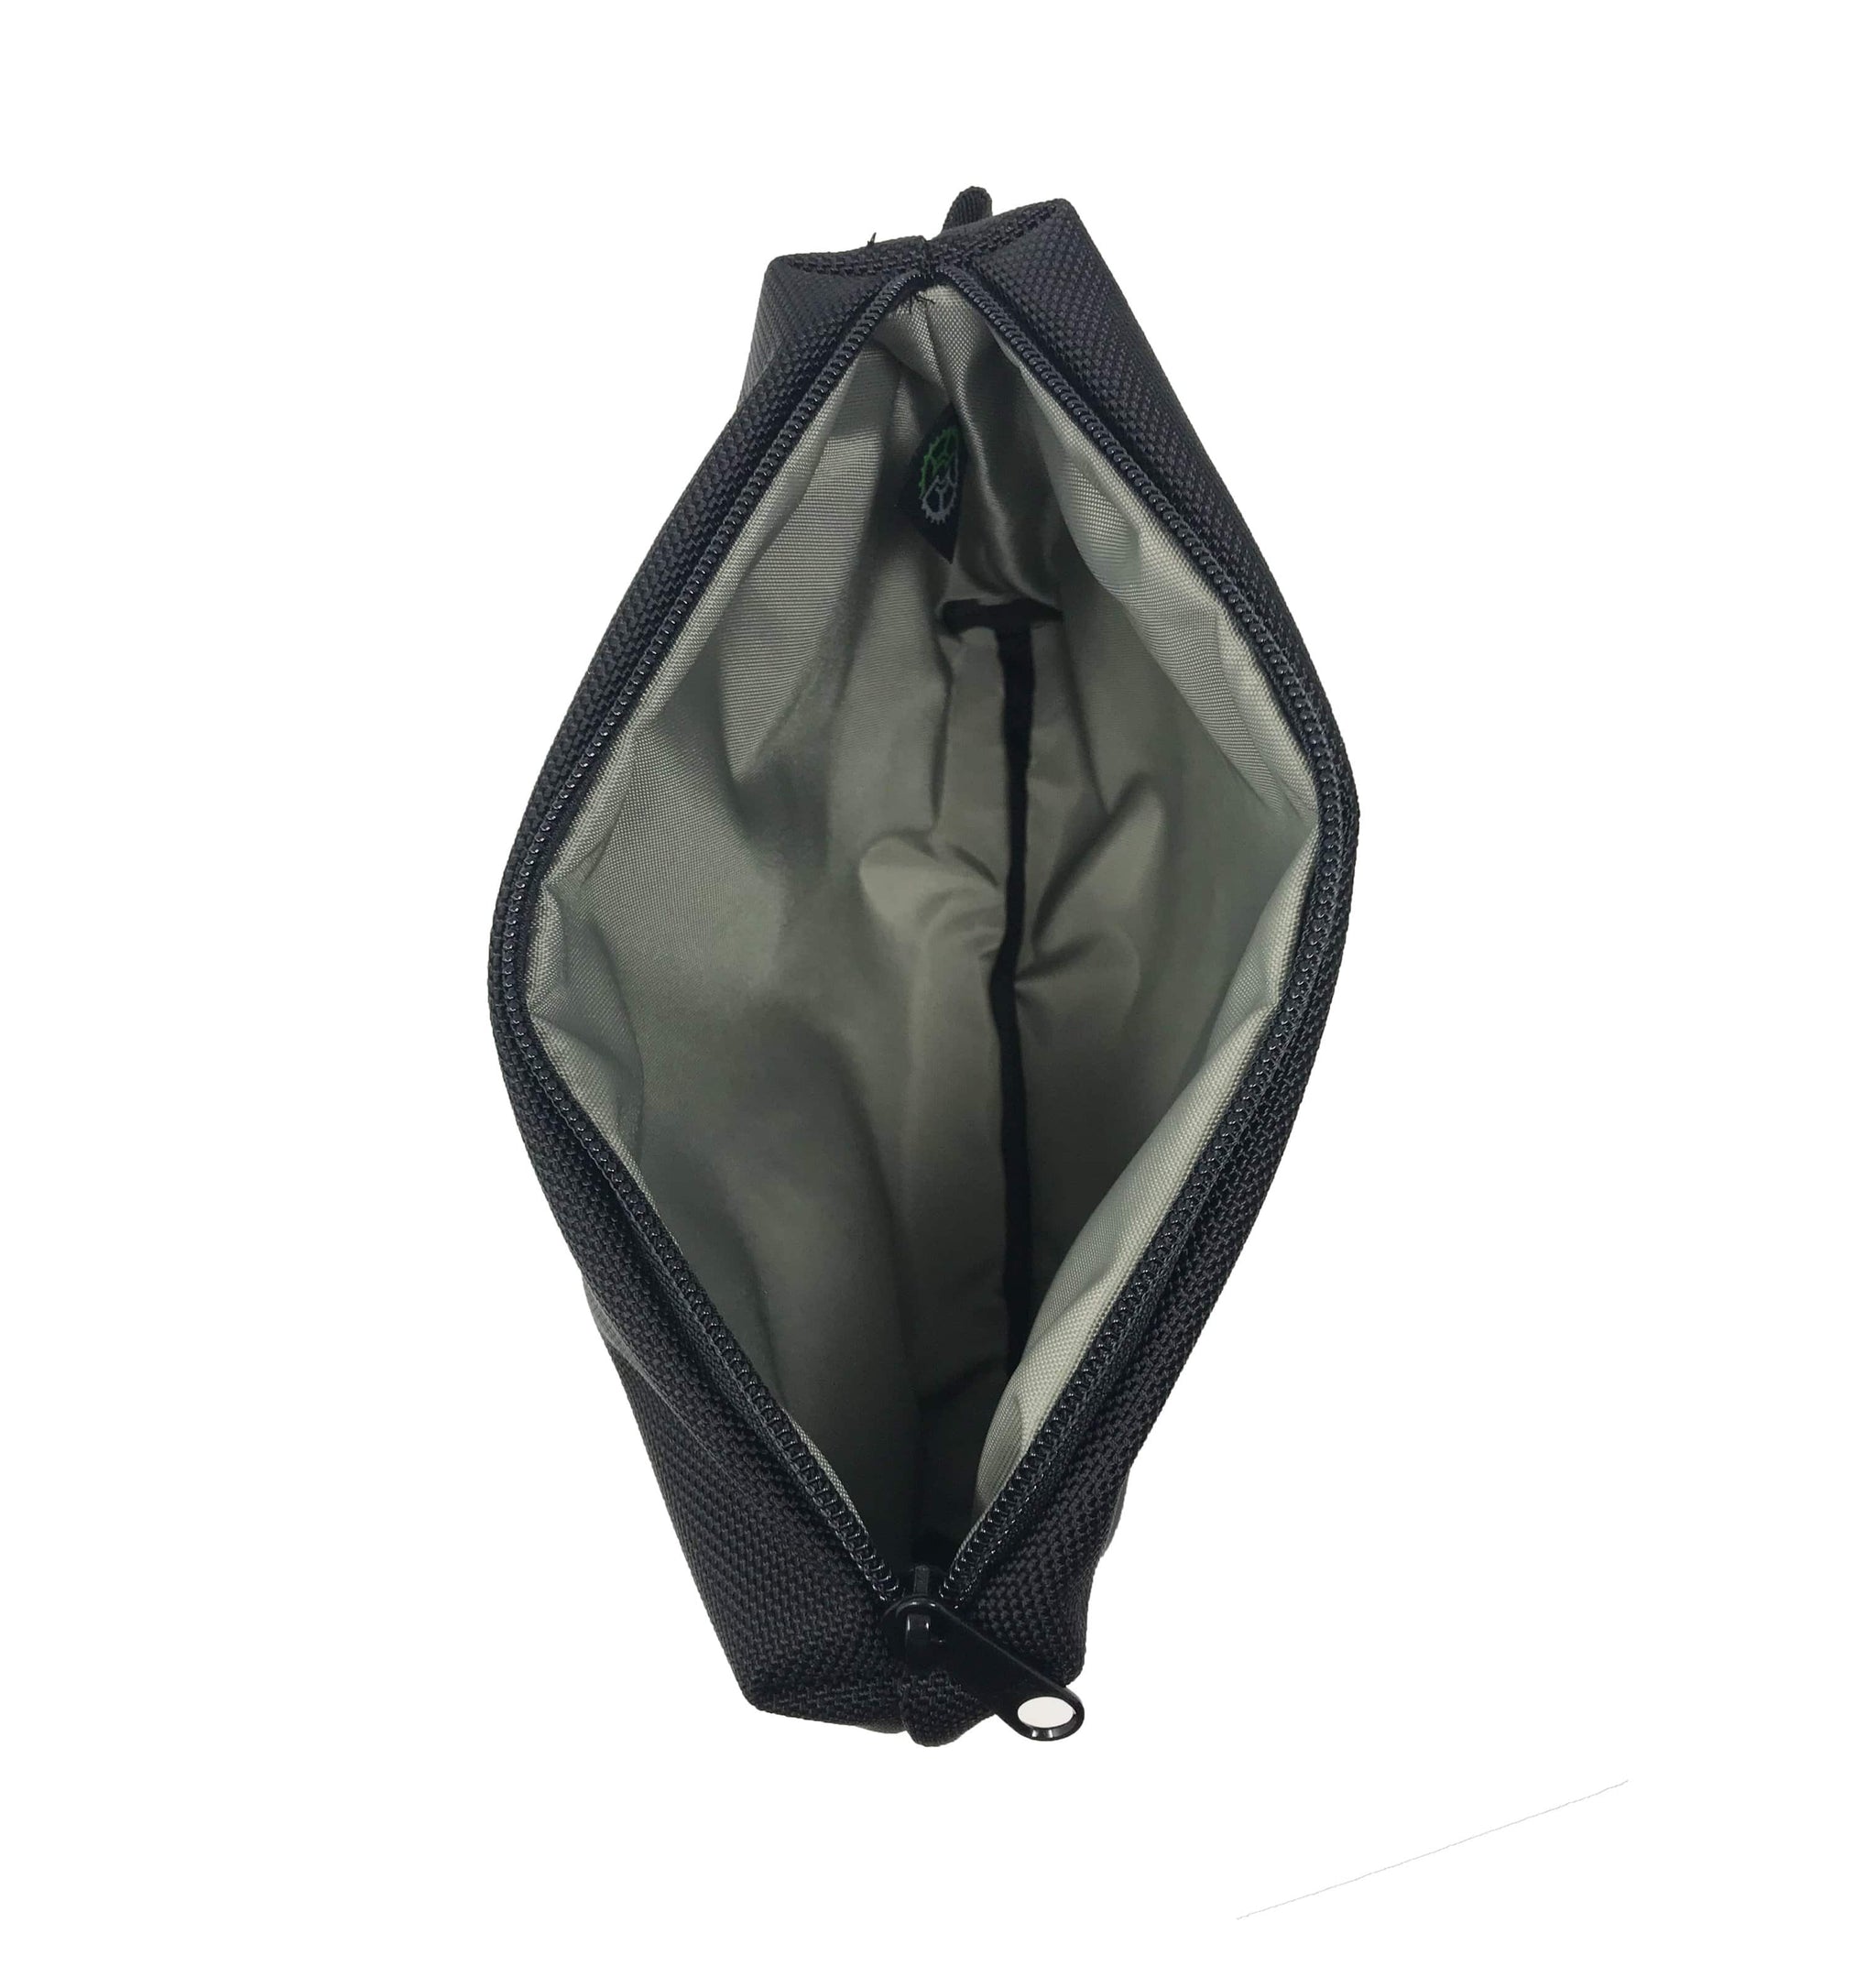 nylon bag with pouch